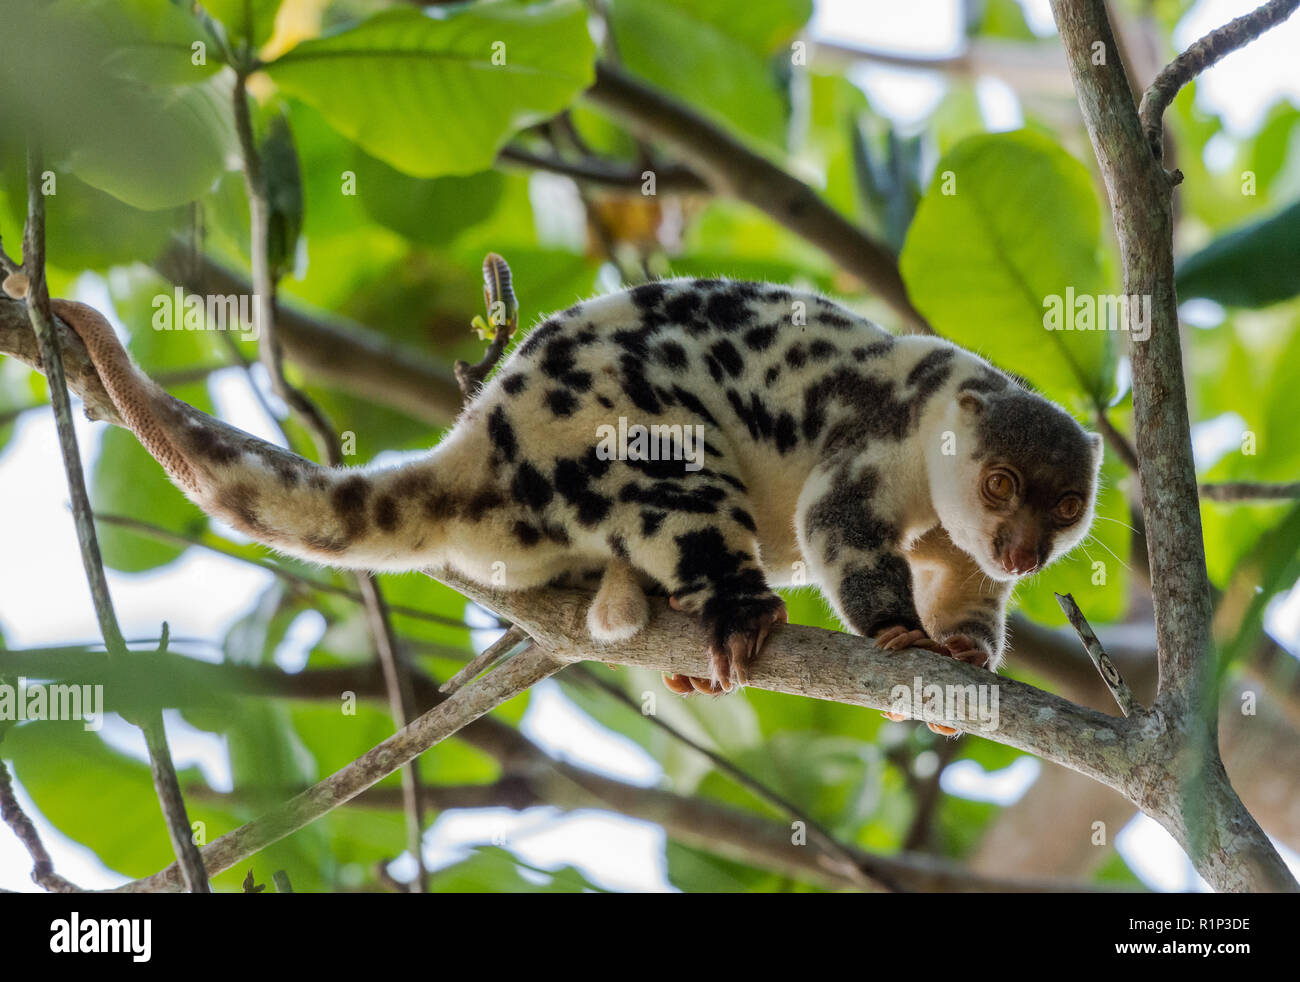 Cuscus High Resolution Stock Photography And Images Alamy